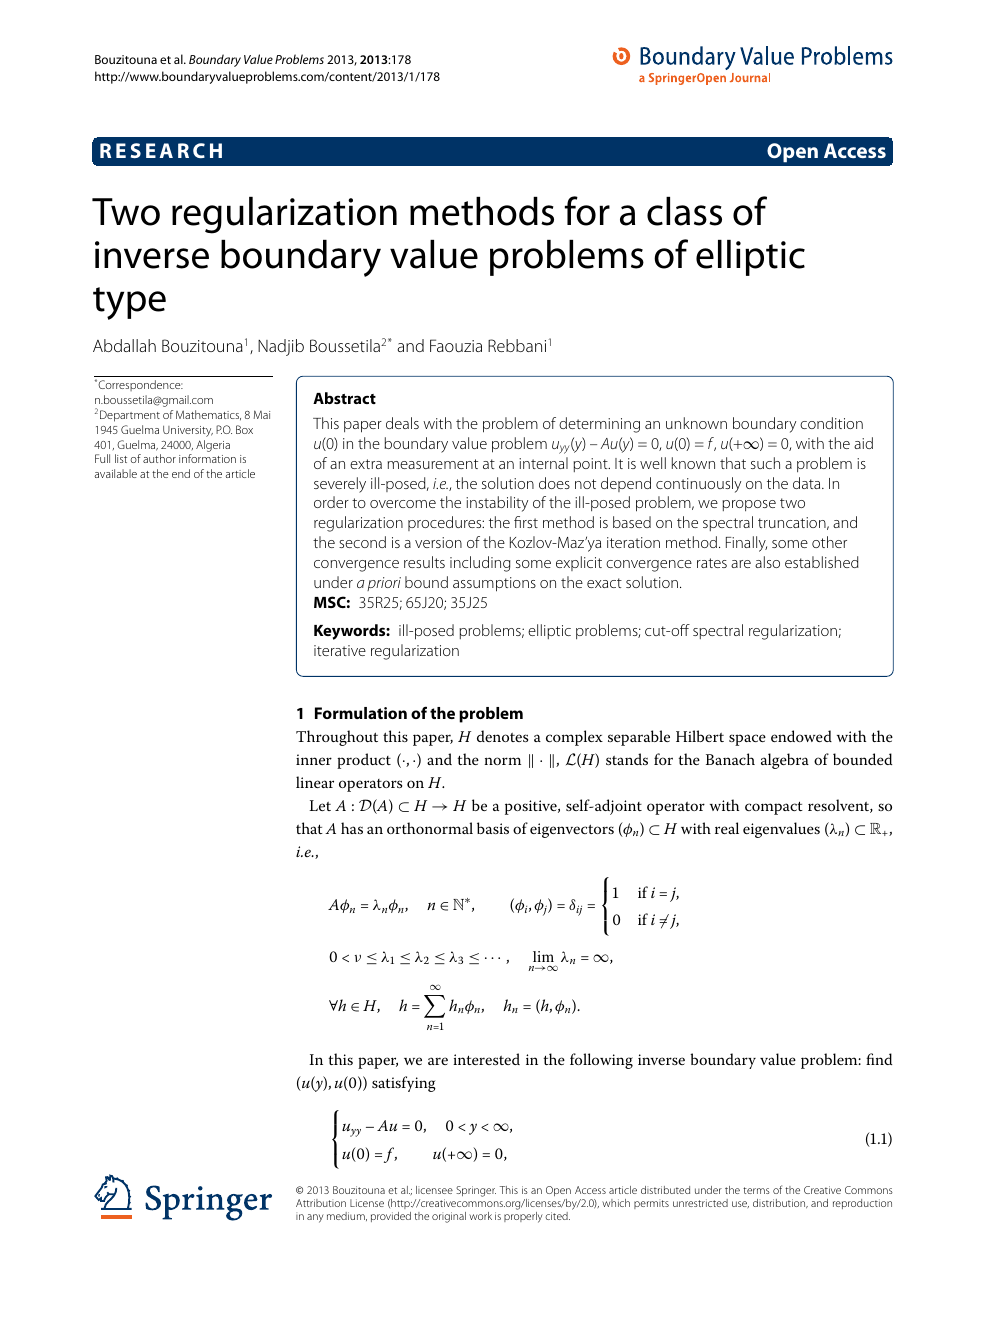 Two Regularization Methods For A Class Of Inverse Boundary Value Problems Of Elliptic Type Topic Of Research Paper In Mathematics Download Scholarly Article Pdf And Read For Free On Cyberleninka Open